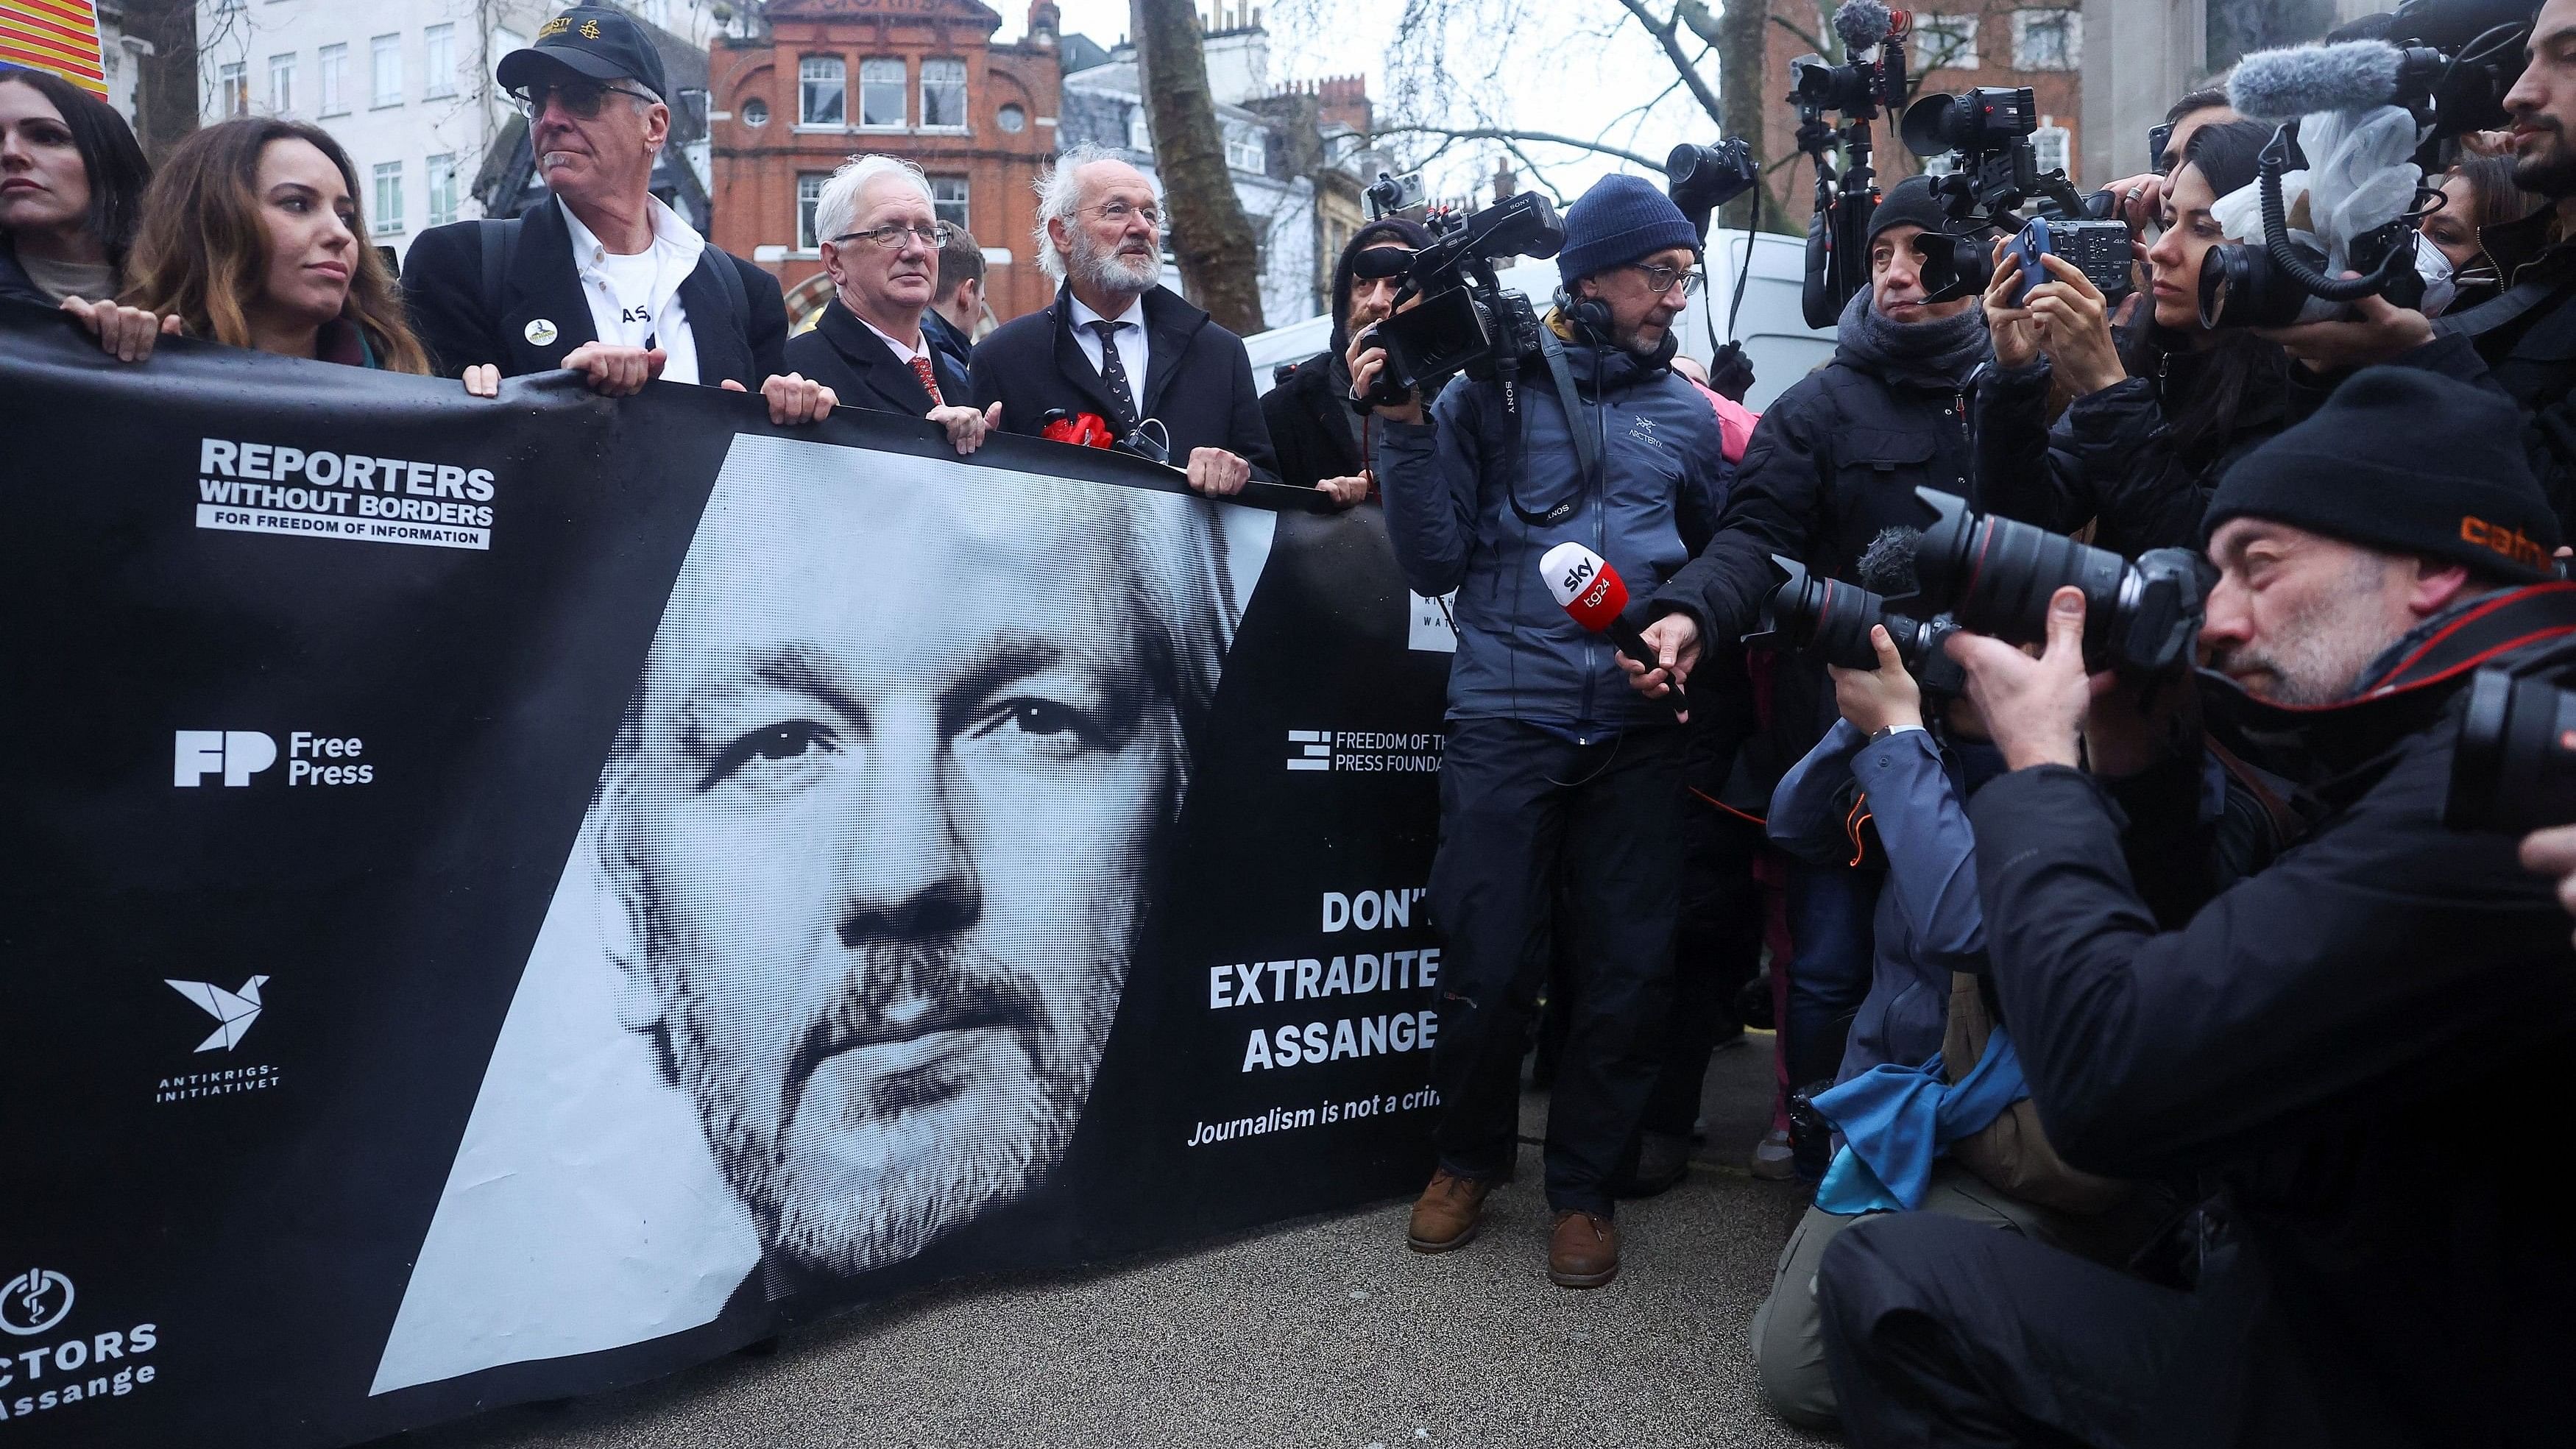 <div class="paragraphs"><p>Stella Assange, the wife of WikiLeaks founder Julian Assange along with supporters of Julian Assange.</p></div>